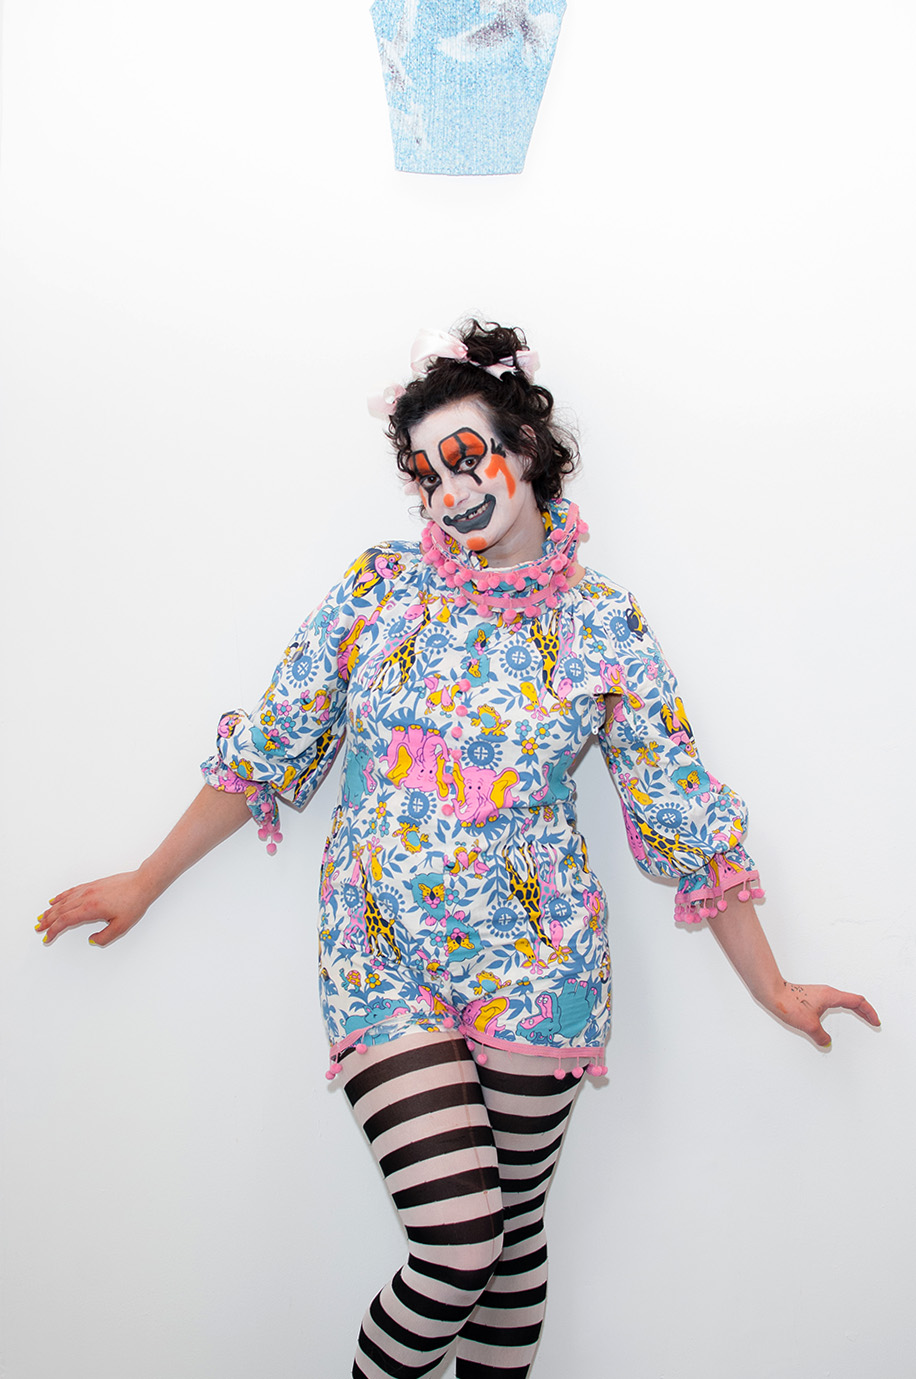 Person dressed as a clown poses under a pleated tank top hung on the wall